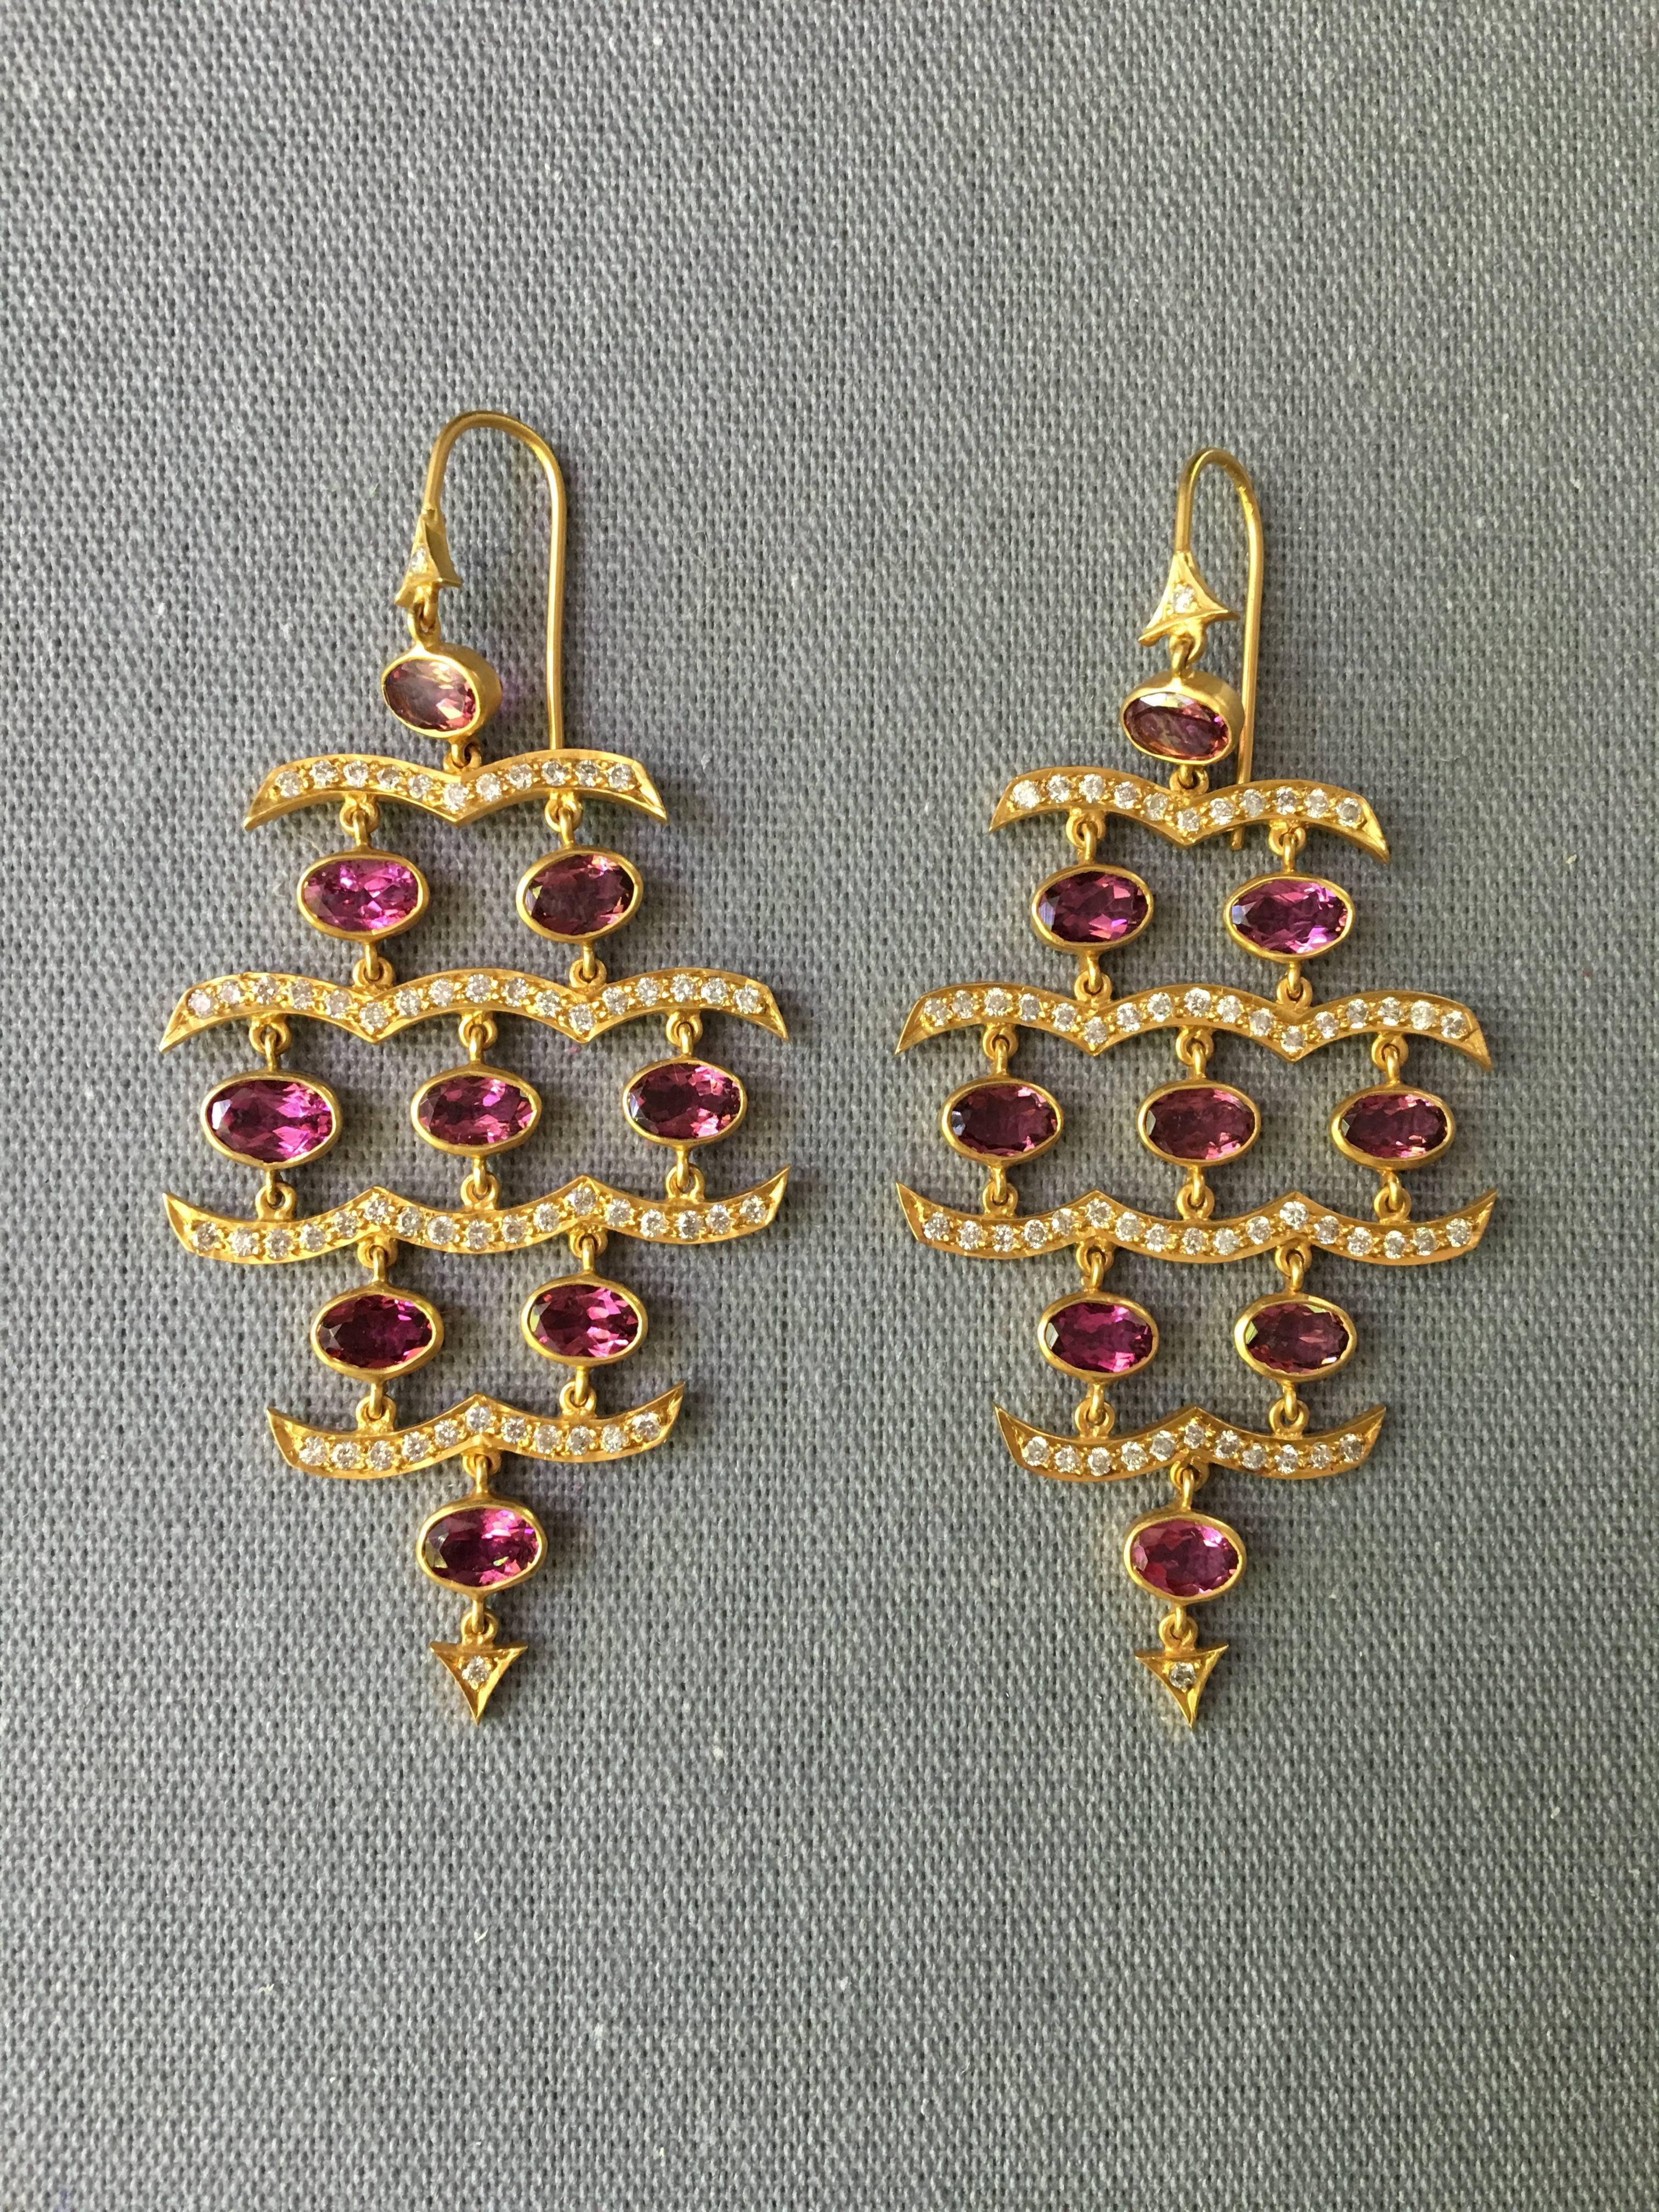 These spectacular earrings were inspired by ocean waves, with 1.5 Carats of White Diamonds embellishing Lauren Harper's signature 18kt Matte Gold finish, with bright pink faceted oval Pink Tourmalines. These earrings boast a big look, but are